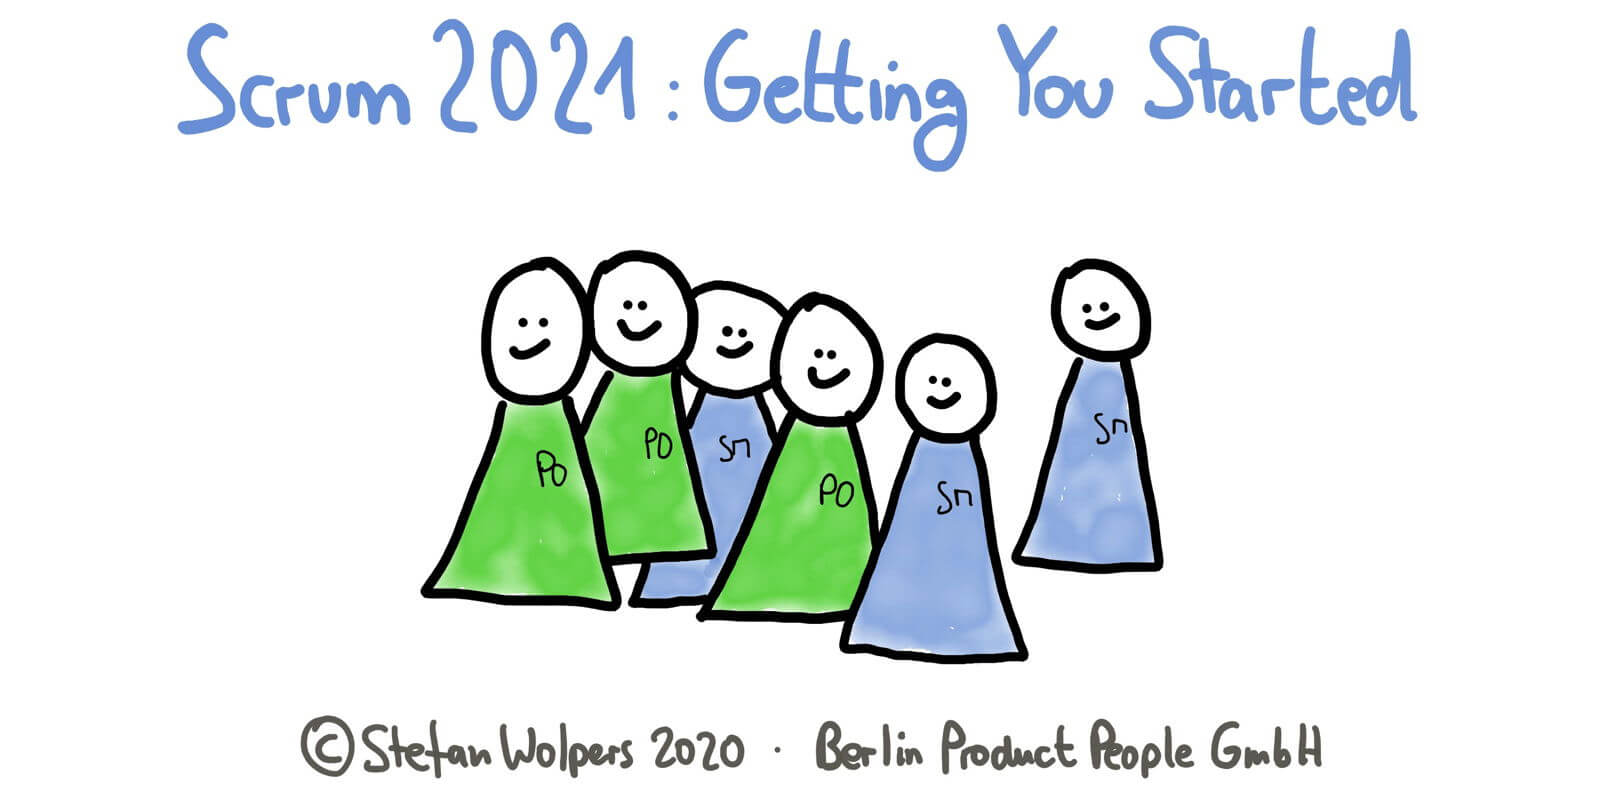 Scrum 2021: Getting You Started as Scrum Master or Product Owner — Age-of-Product.com